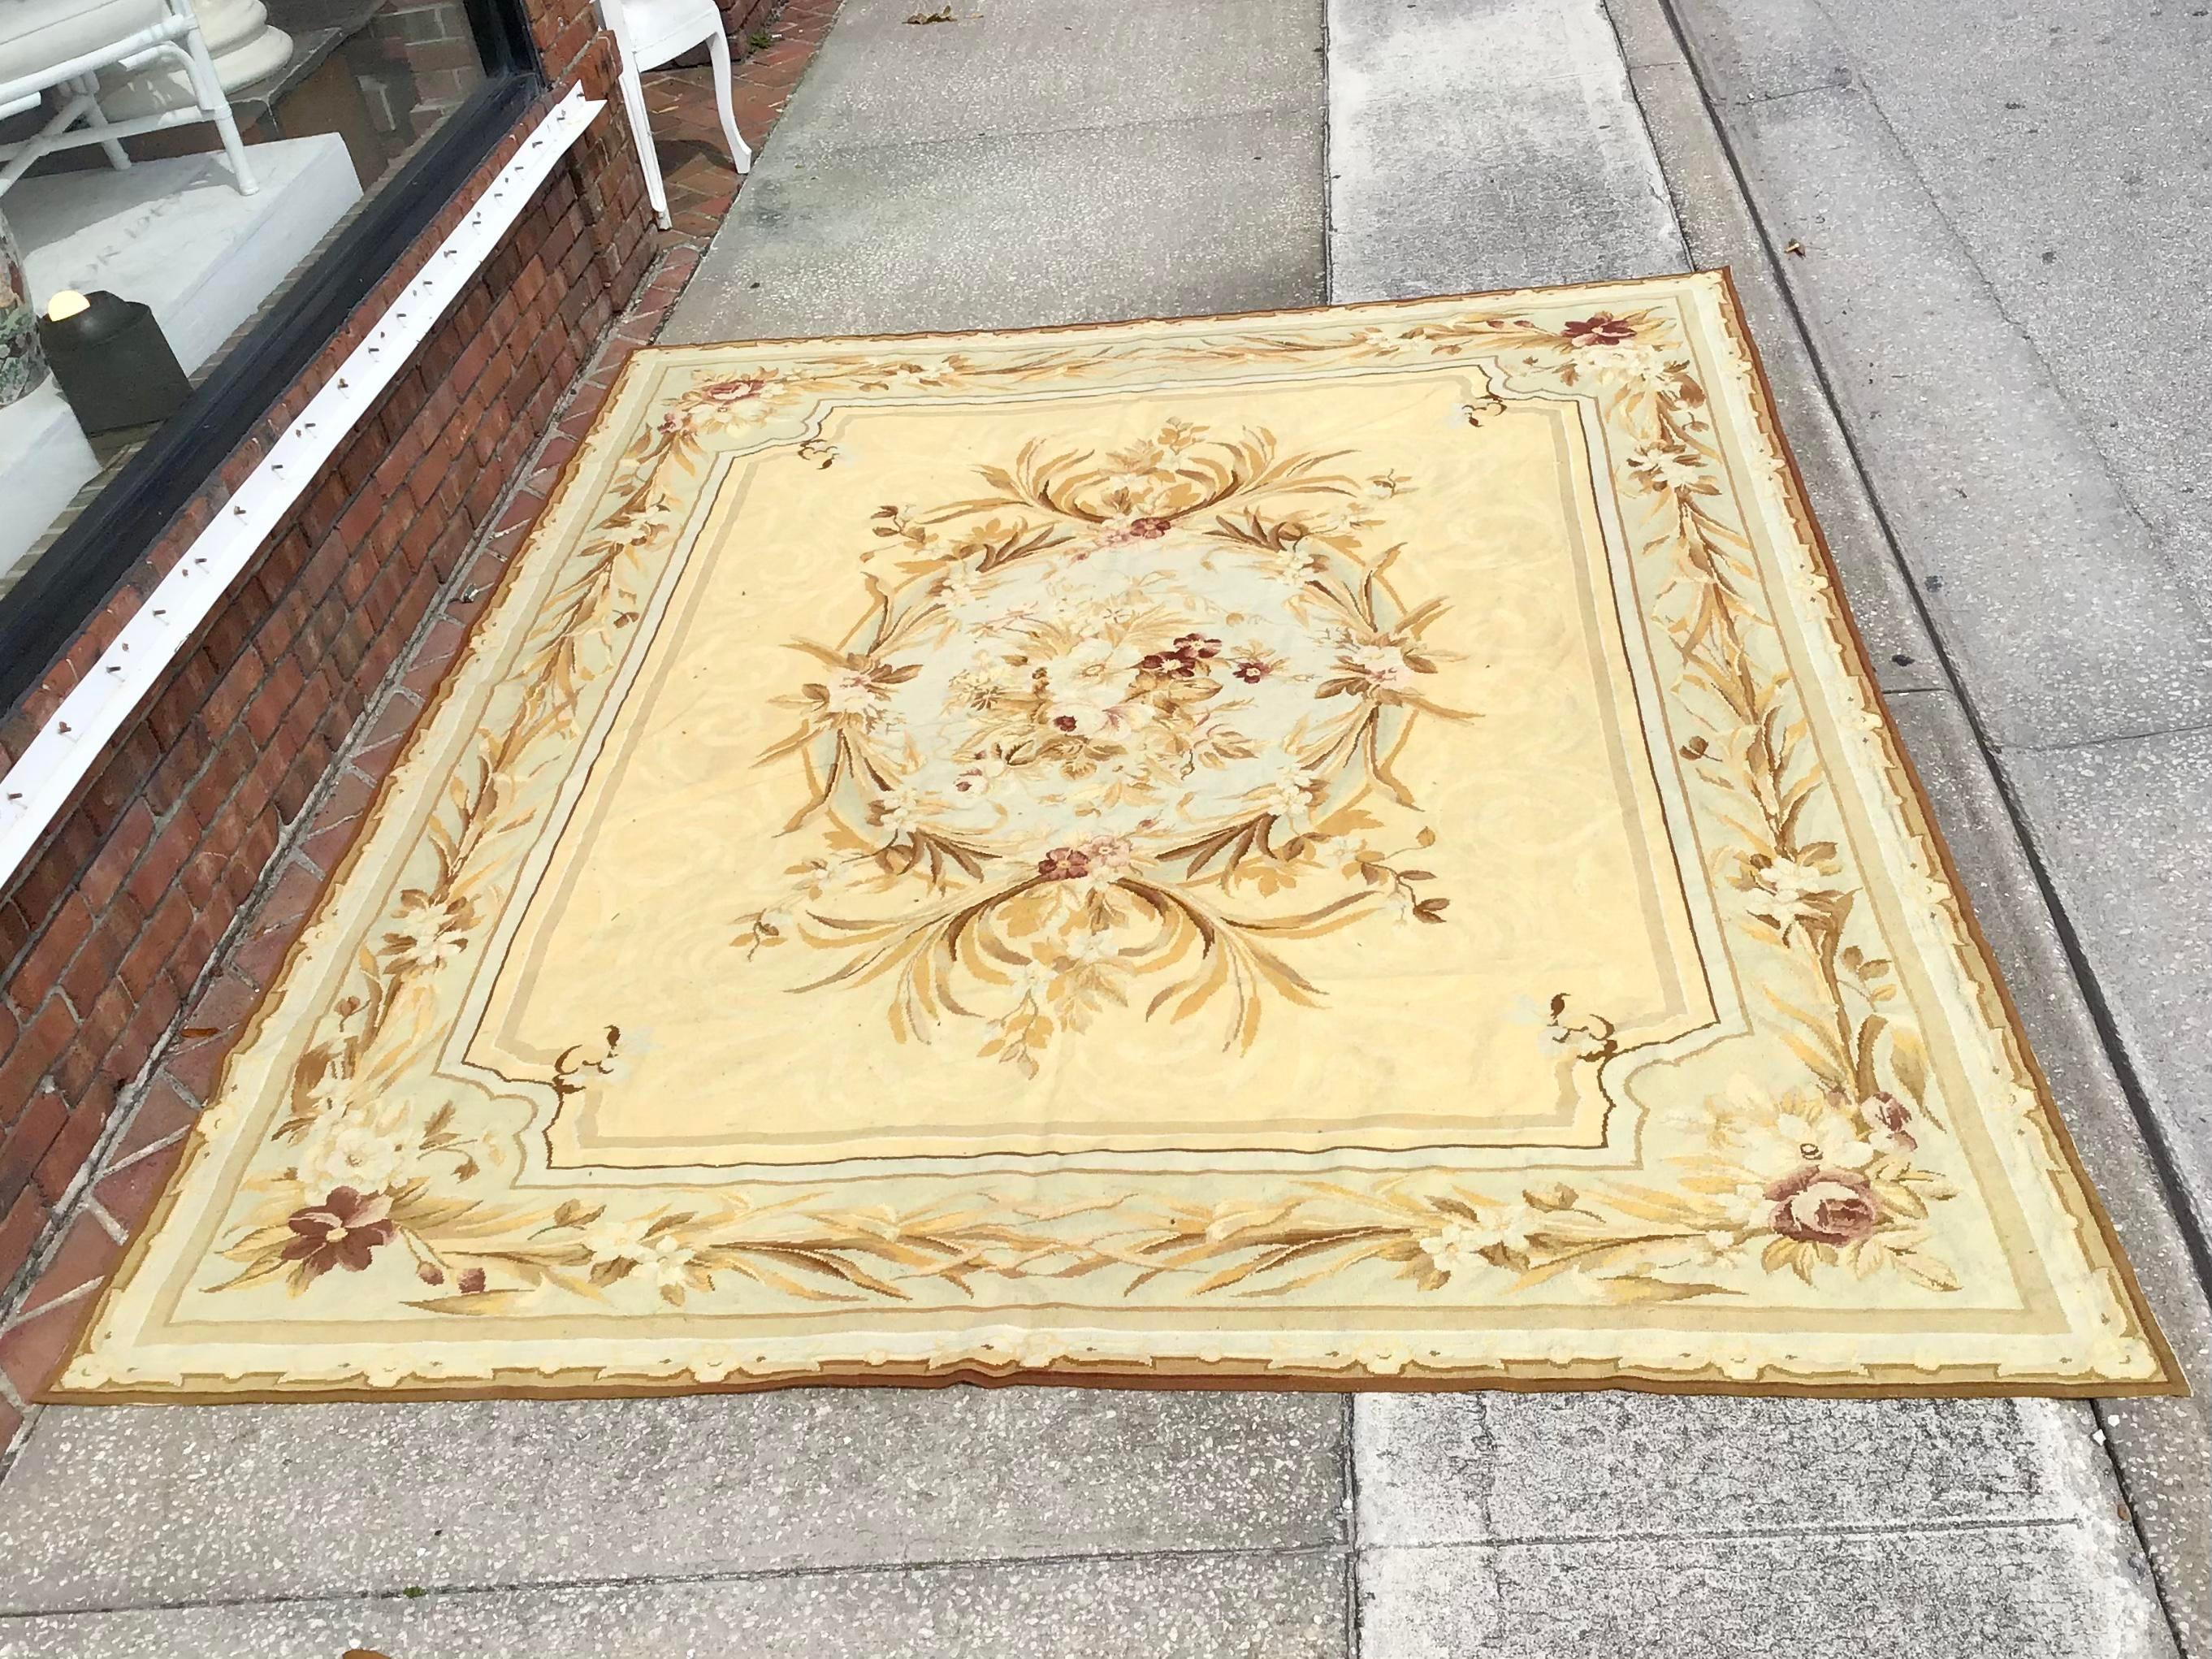 Gorgeous French Aubusson needlepoint carpet in the style of the iconic French designer Henri Samuel. Add some real glamour to your residence withe this very well made French Aubusson. Slightly faded in the perfect kinda way that adds to the